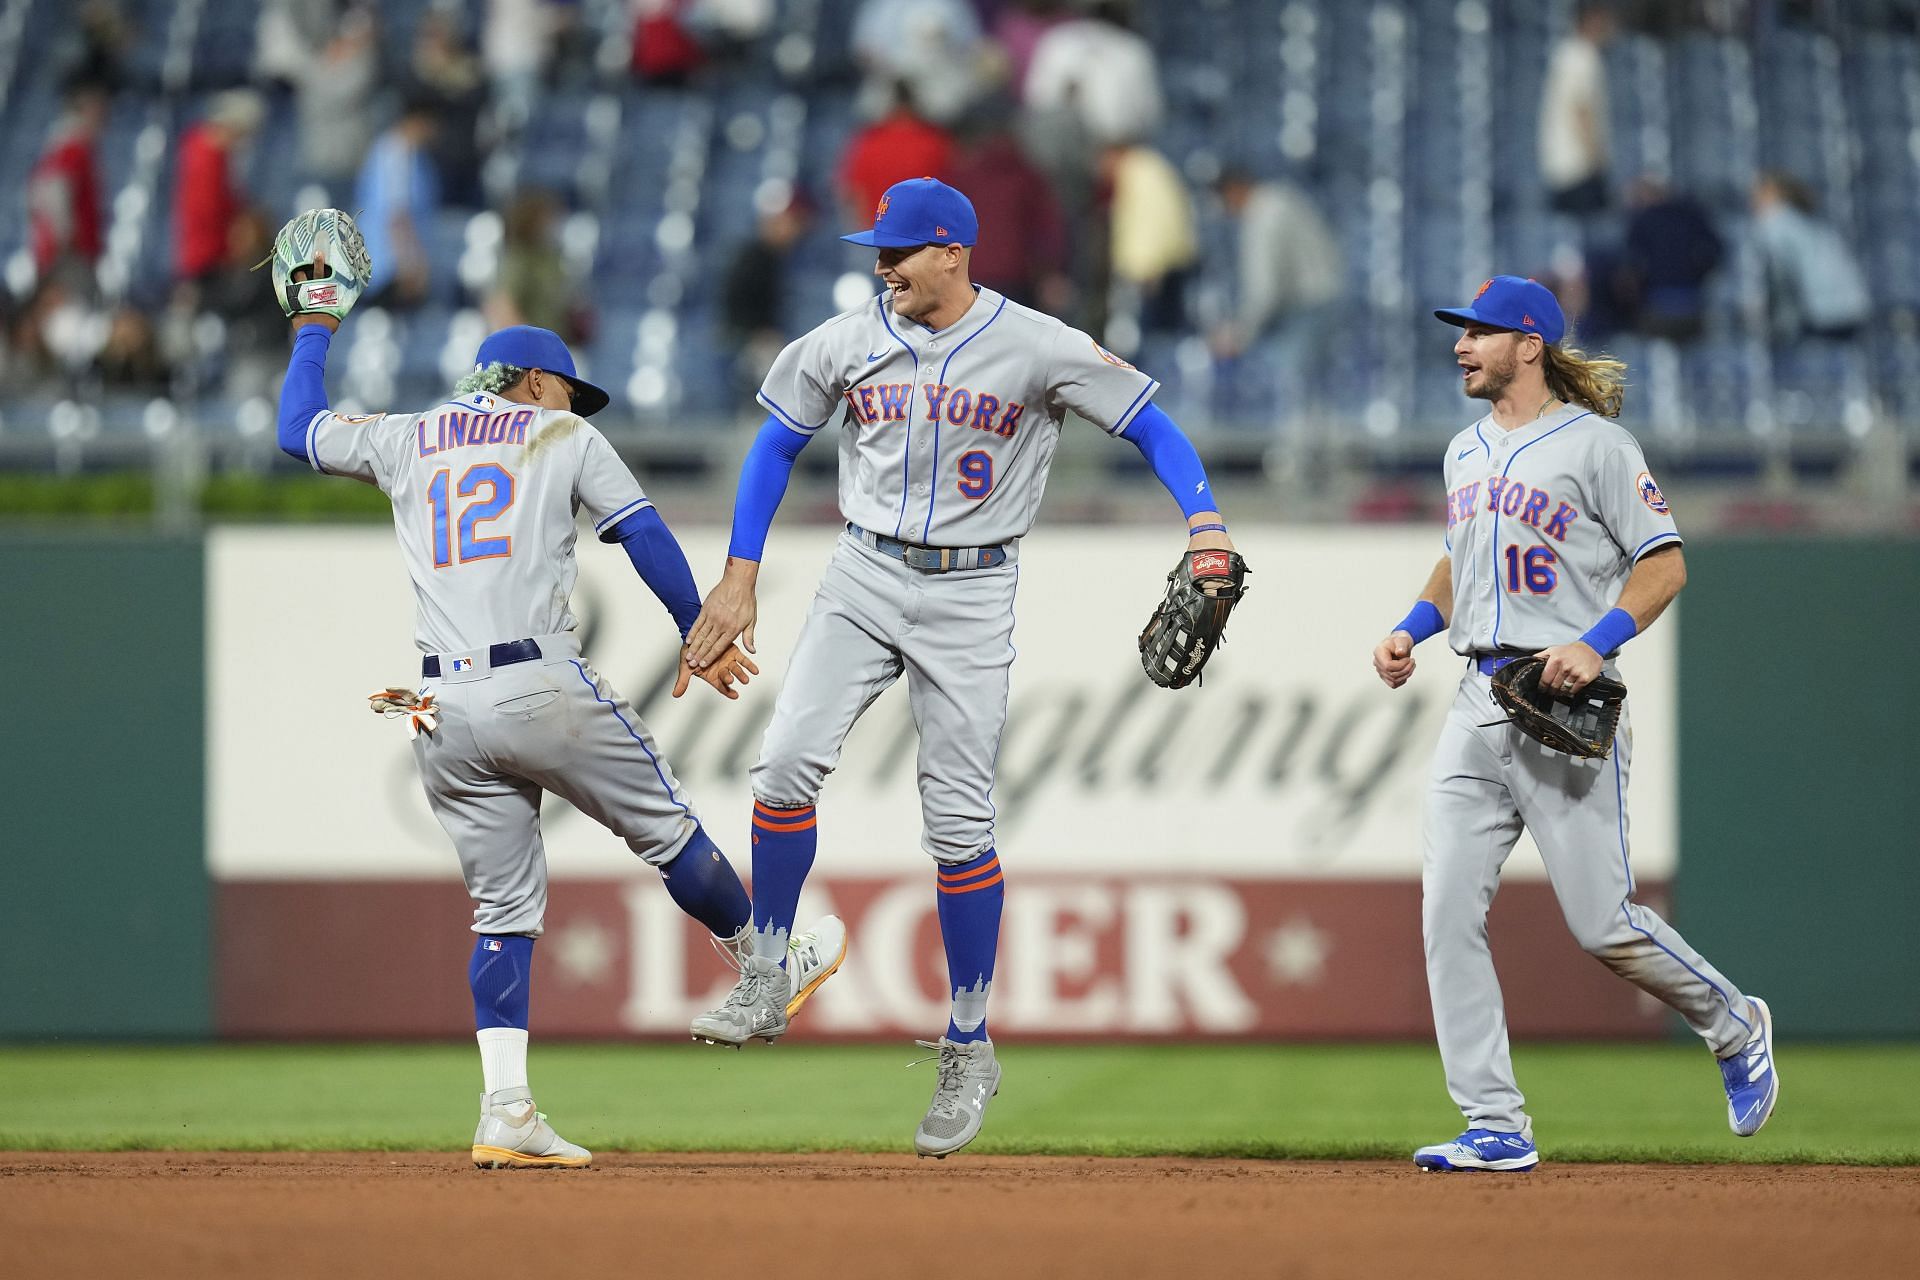 MLB 2022 - New York Mets scored 7 runs in the ninth inning to defeat the Philadelphia Phillies 8-7 on May 6